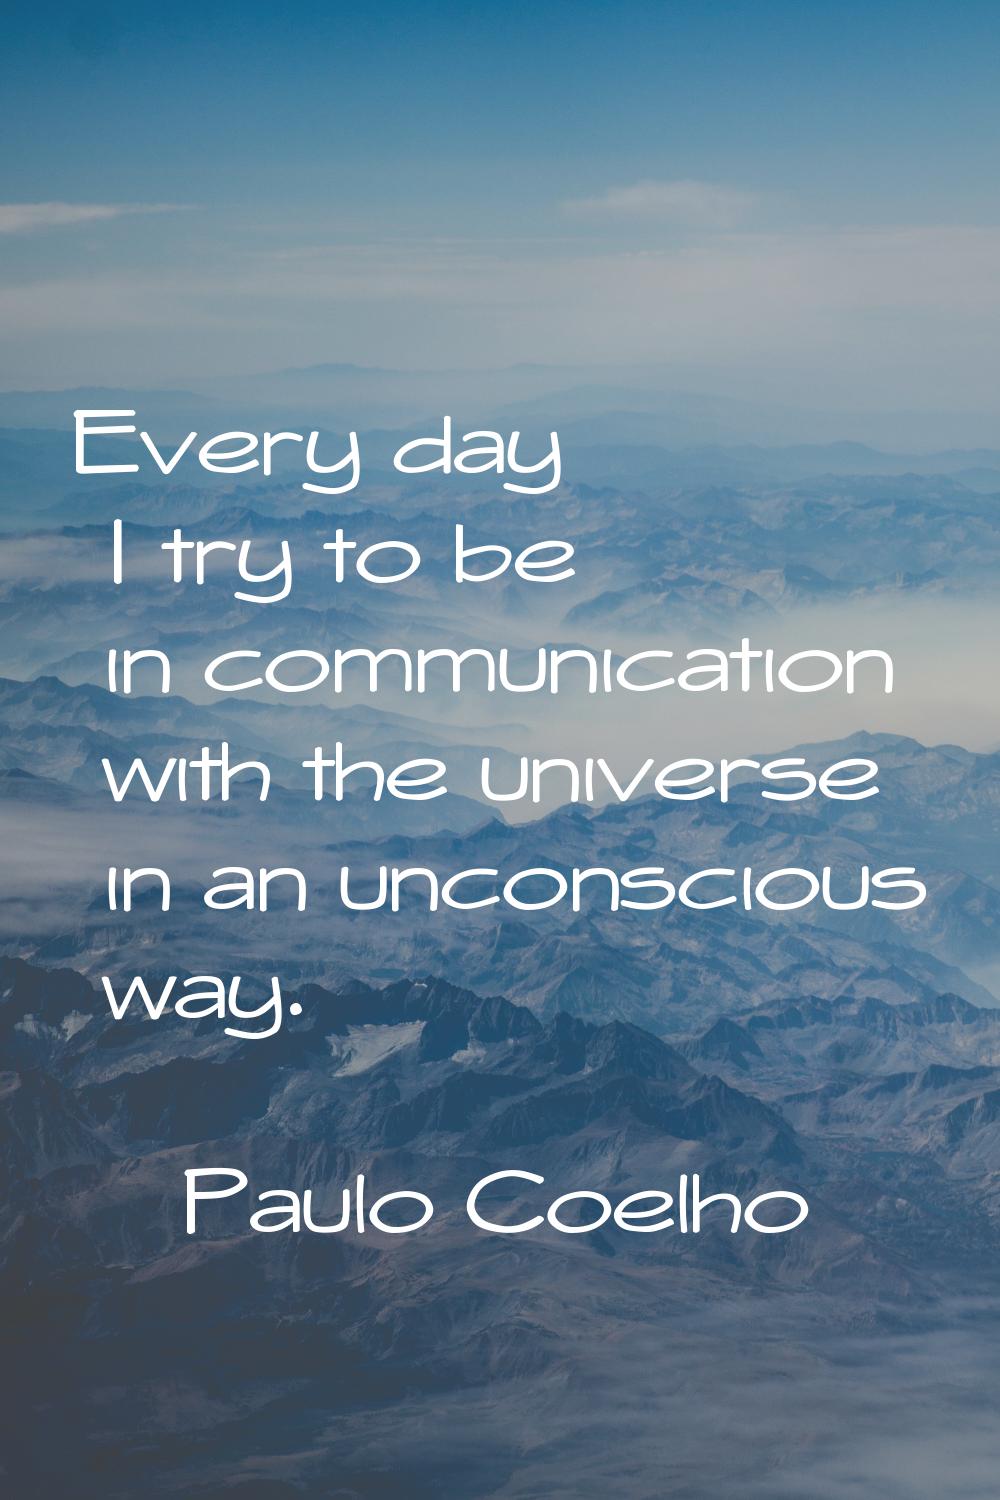 Every day I try to be in communication with the universe in an unconscious way.